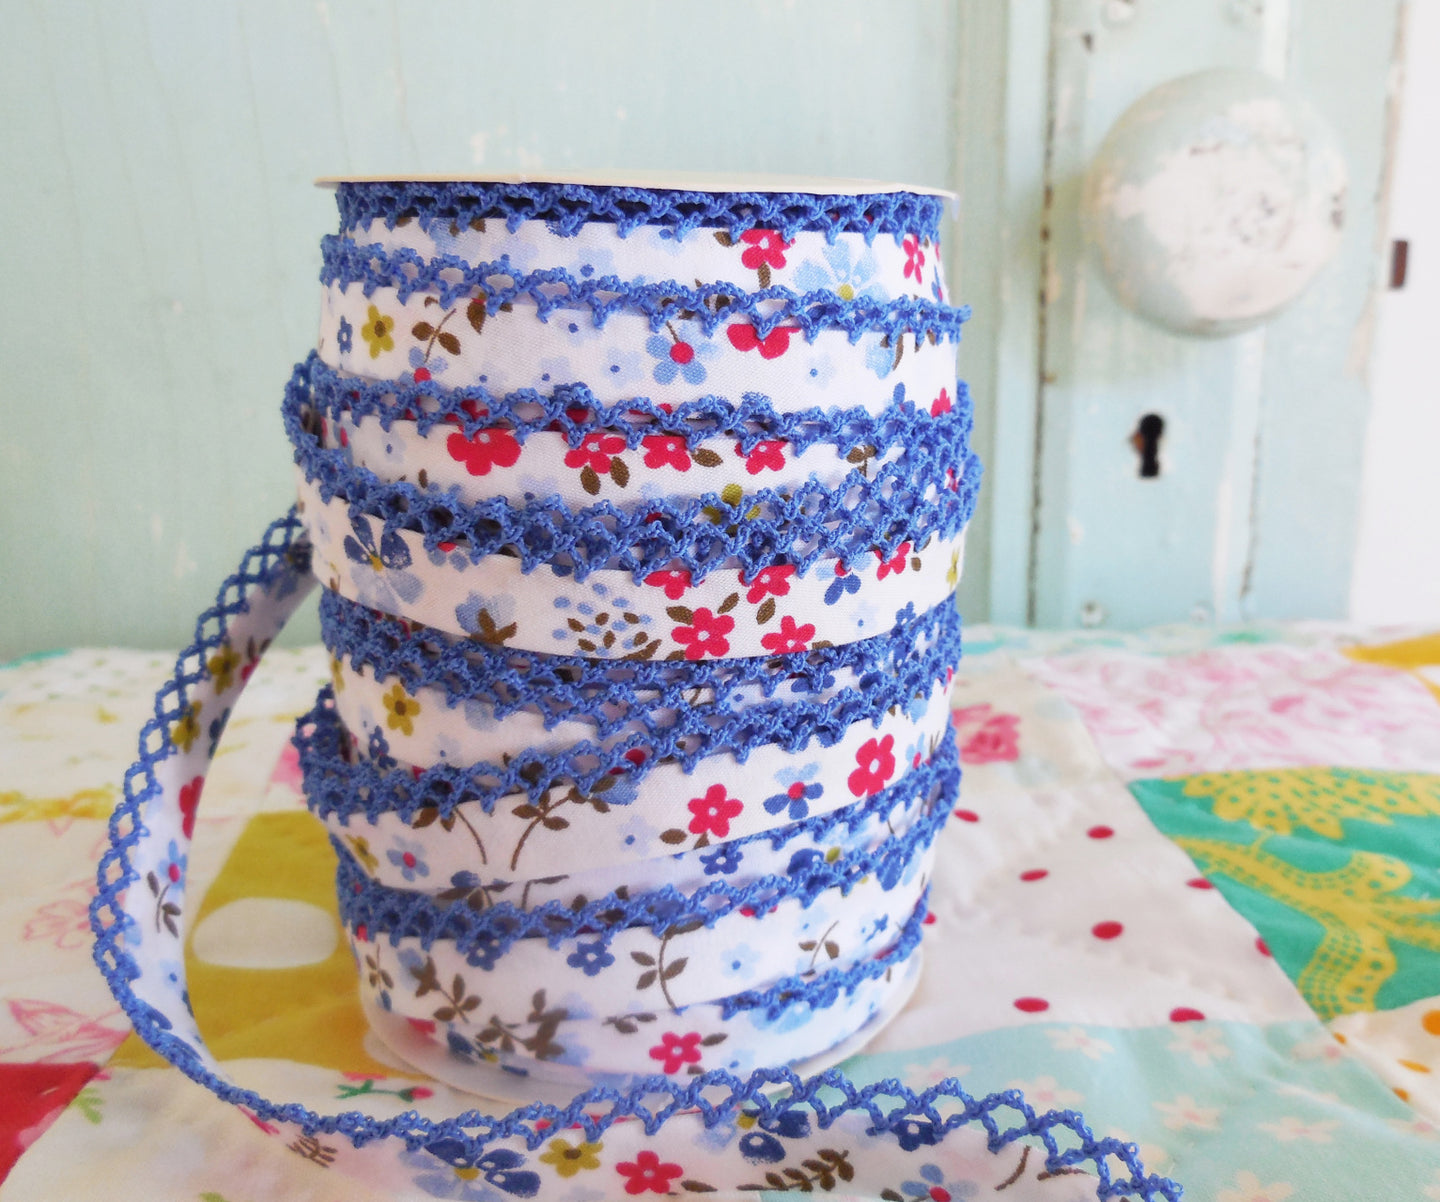 LACE BIAS TAPE, BLUE FLORAL Double Fold Crochet Edge  (BY THE YARD)